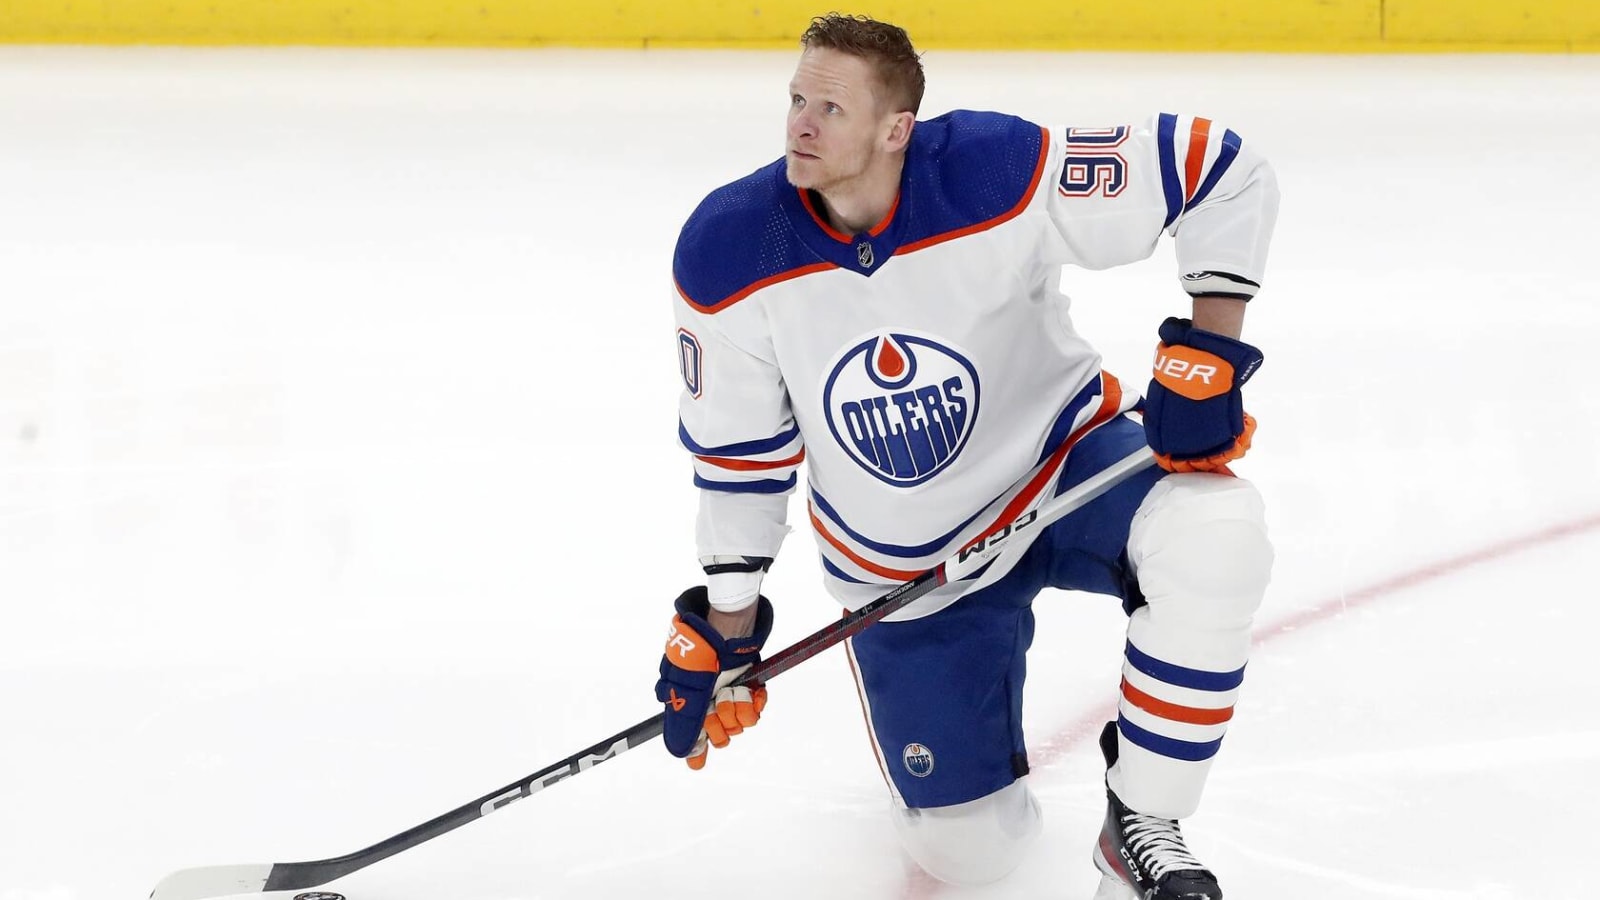 Corey Perry, Evander Kane exchange words on Oilers bench during Saturday night game against Flames